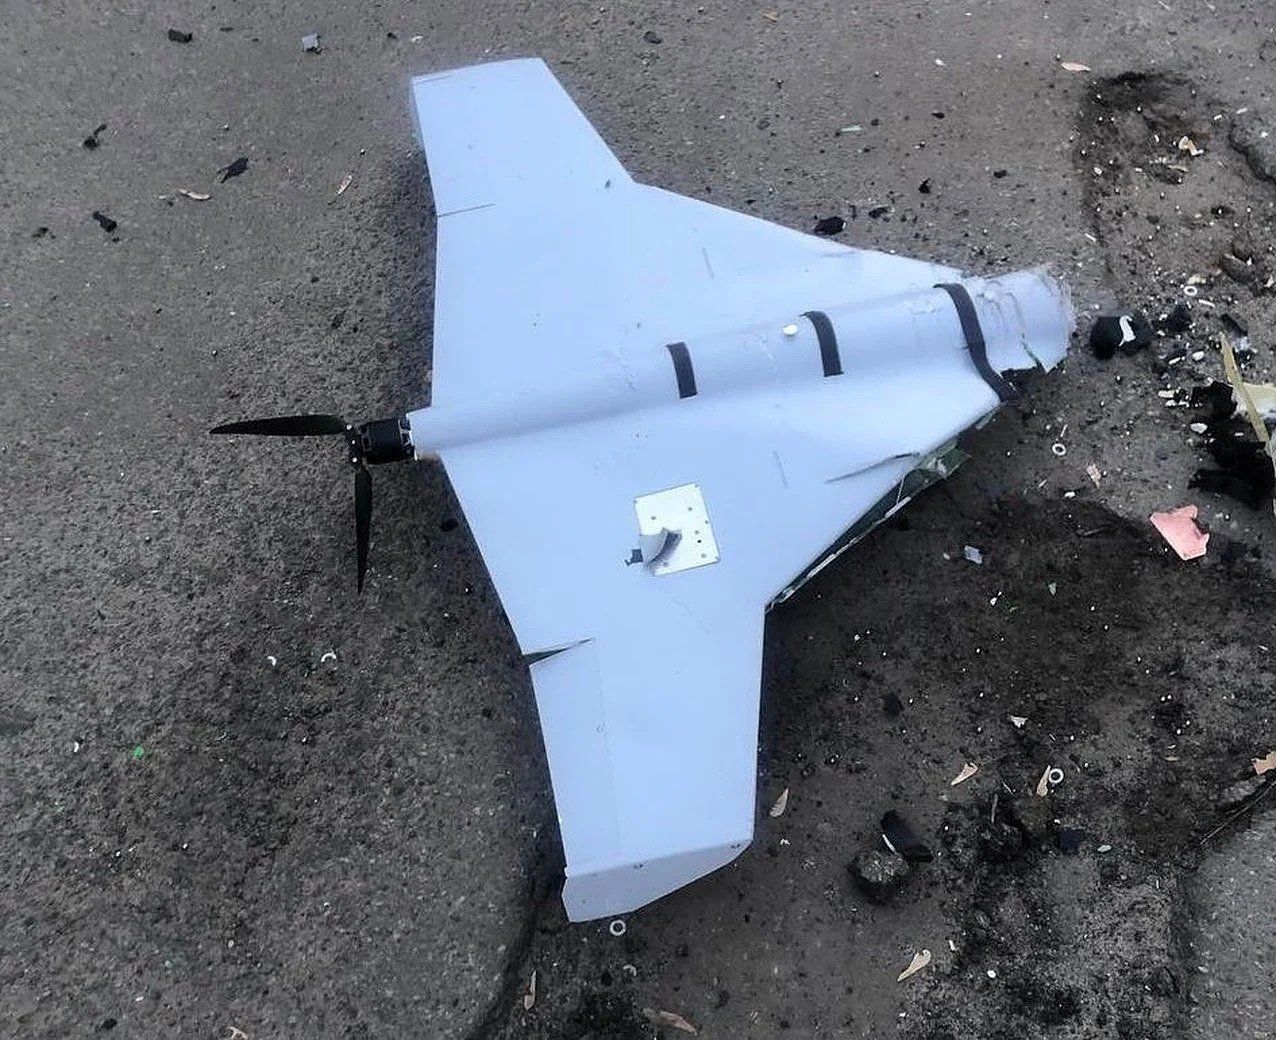 Sumy region  Russia uses kamikaze drones to attack towns - en